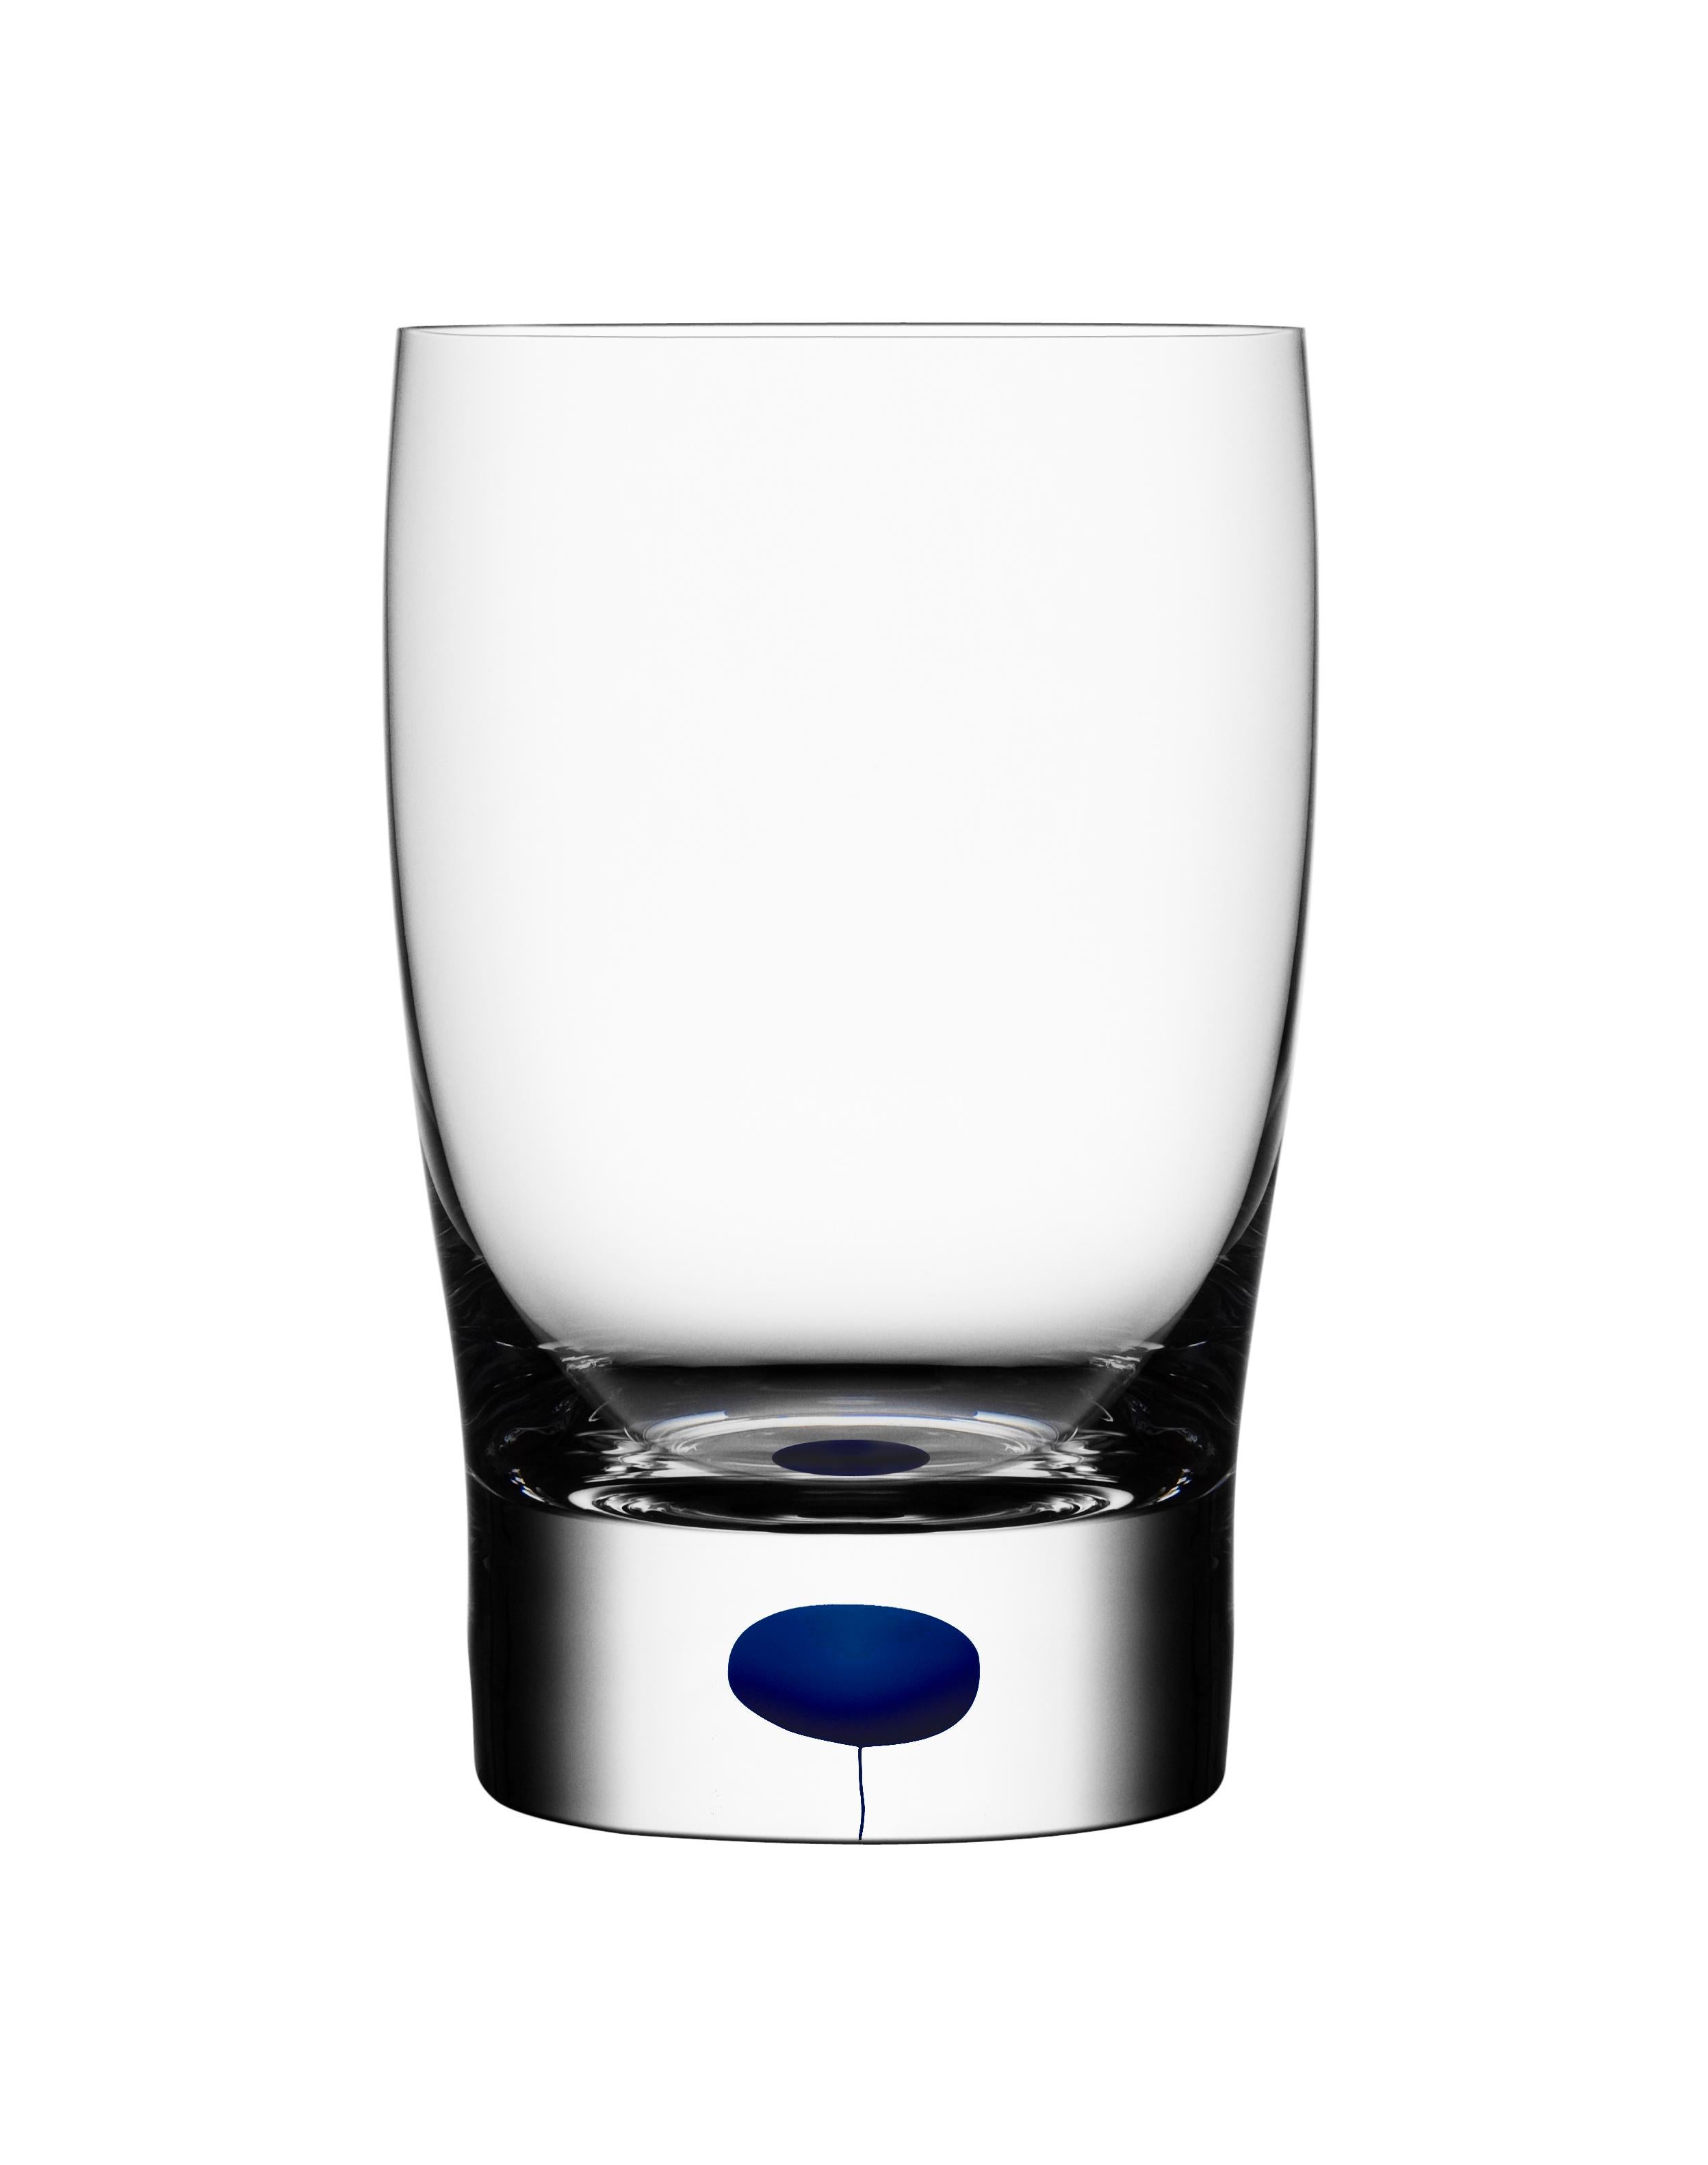 Intermezzo Tumbler/Juice from Orrefors was designed in 1984. The glass, which holds 9 oz, is intended as a smaller highball glass for juice and other non-alcoholic beverages. Intermezzo Tumbler/Juice is mouth-blown in Sweden by expert glassblowers